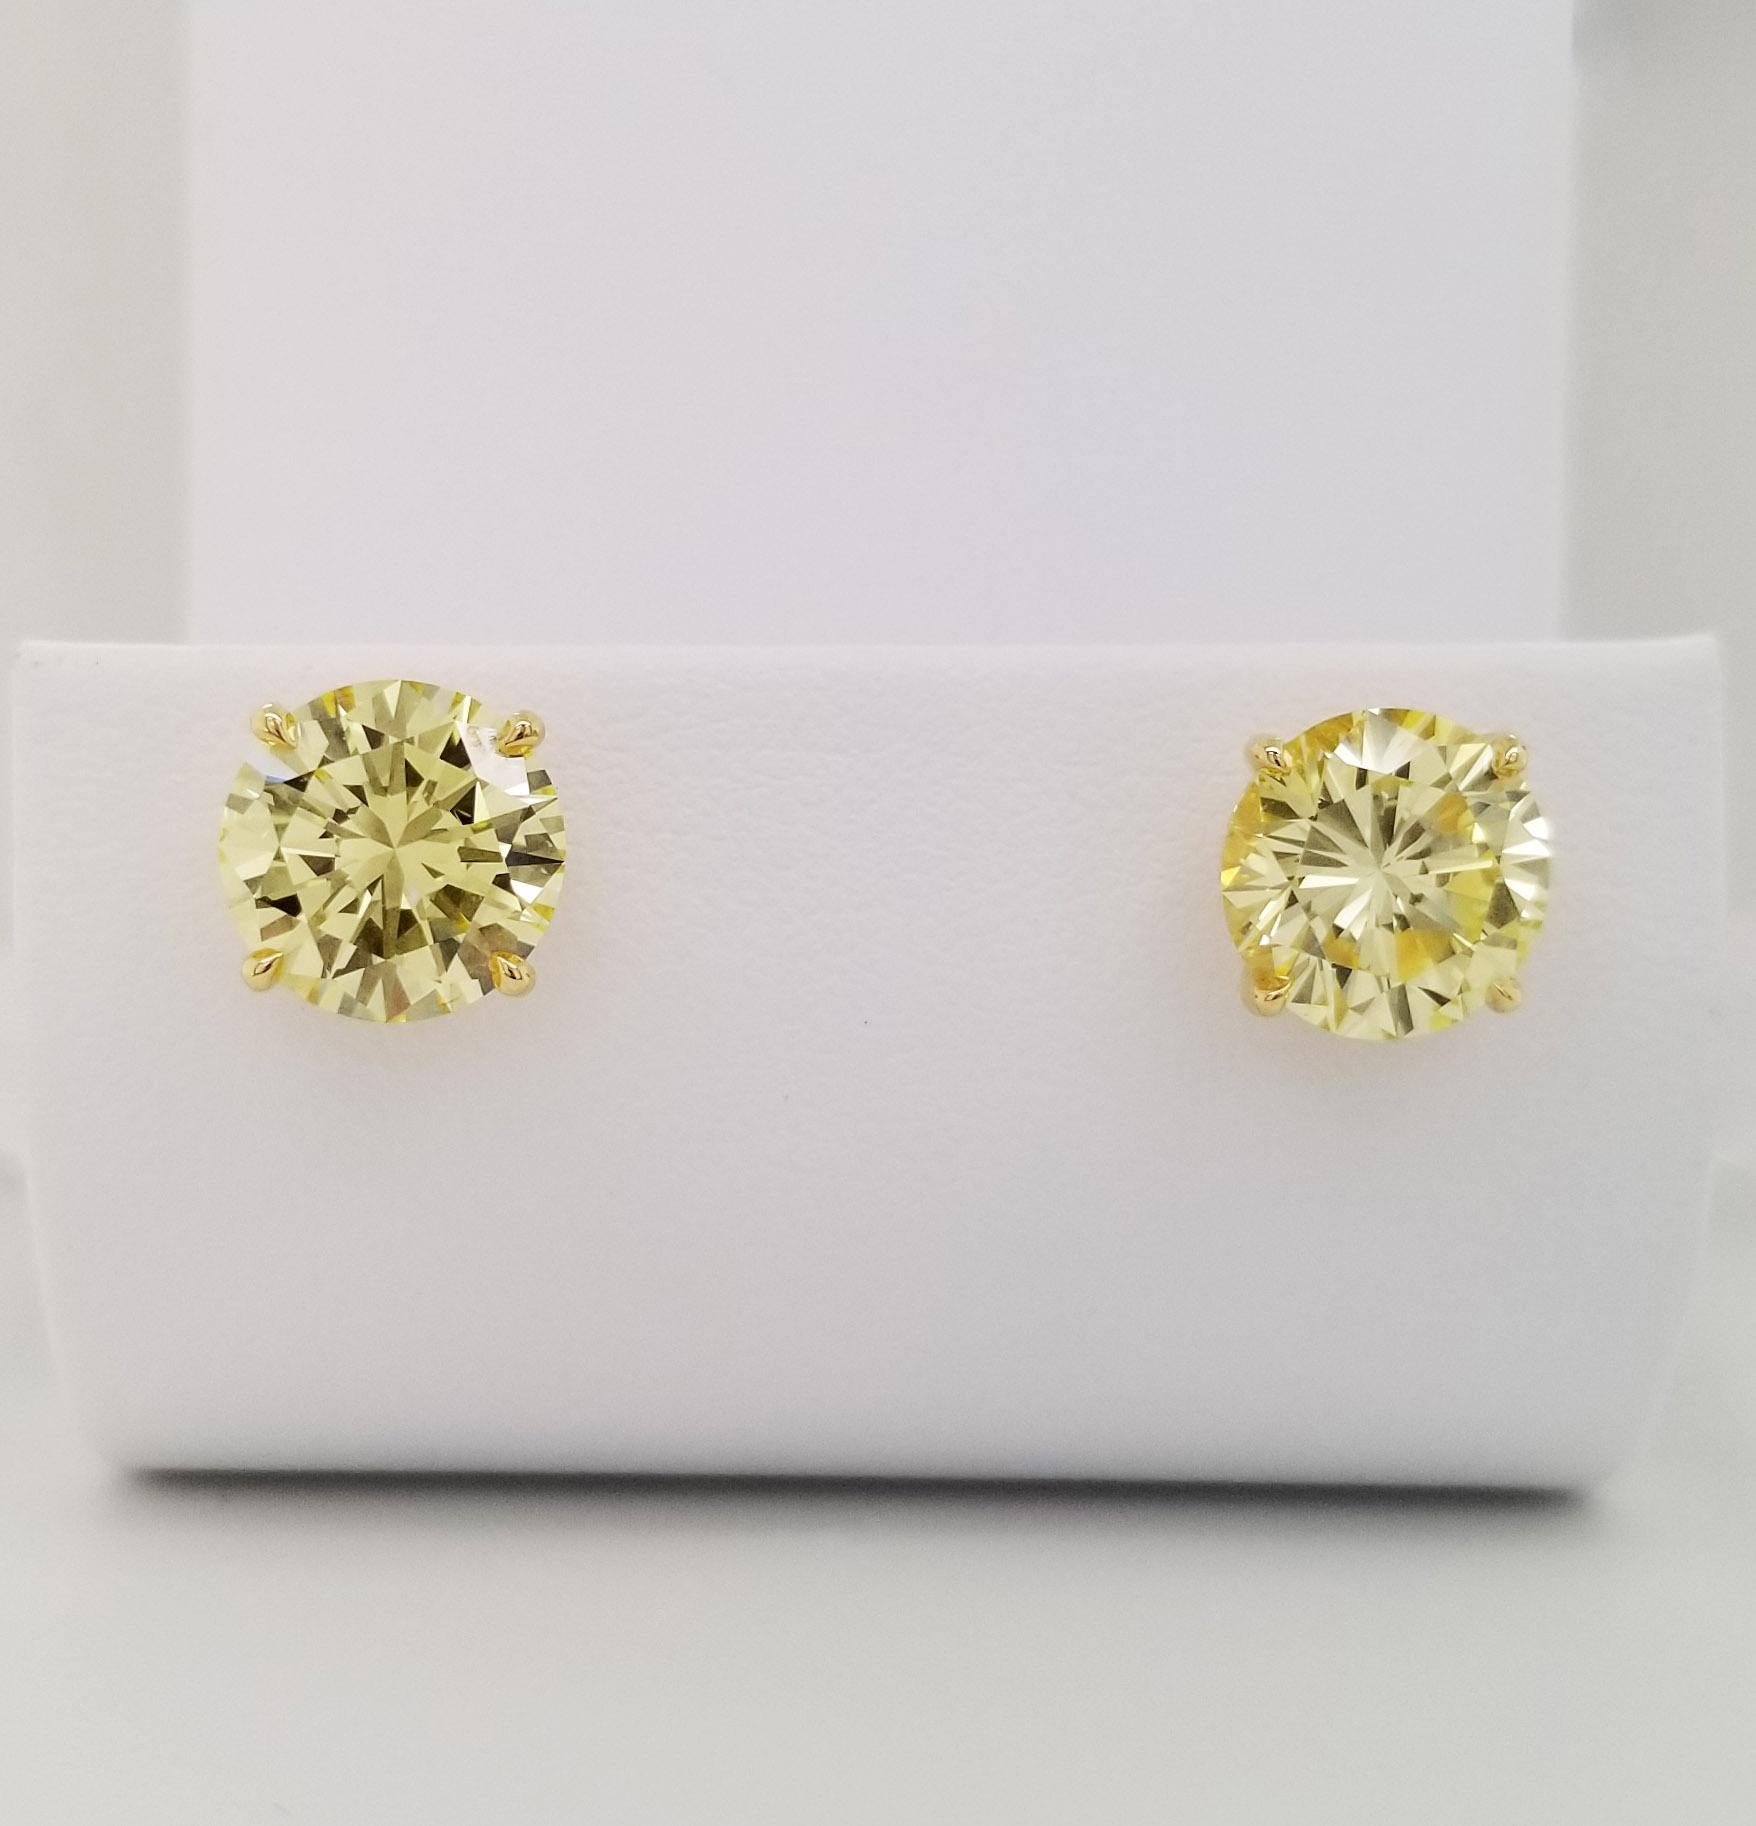 SCARSELLI Stud Gold Earrings 3 Carat Fancy Intense Yellow Diamond Each  In New Condition For Sale In New York, NY